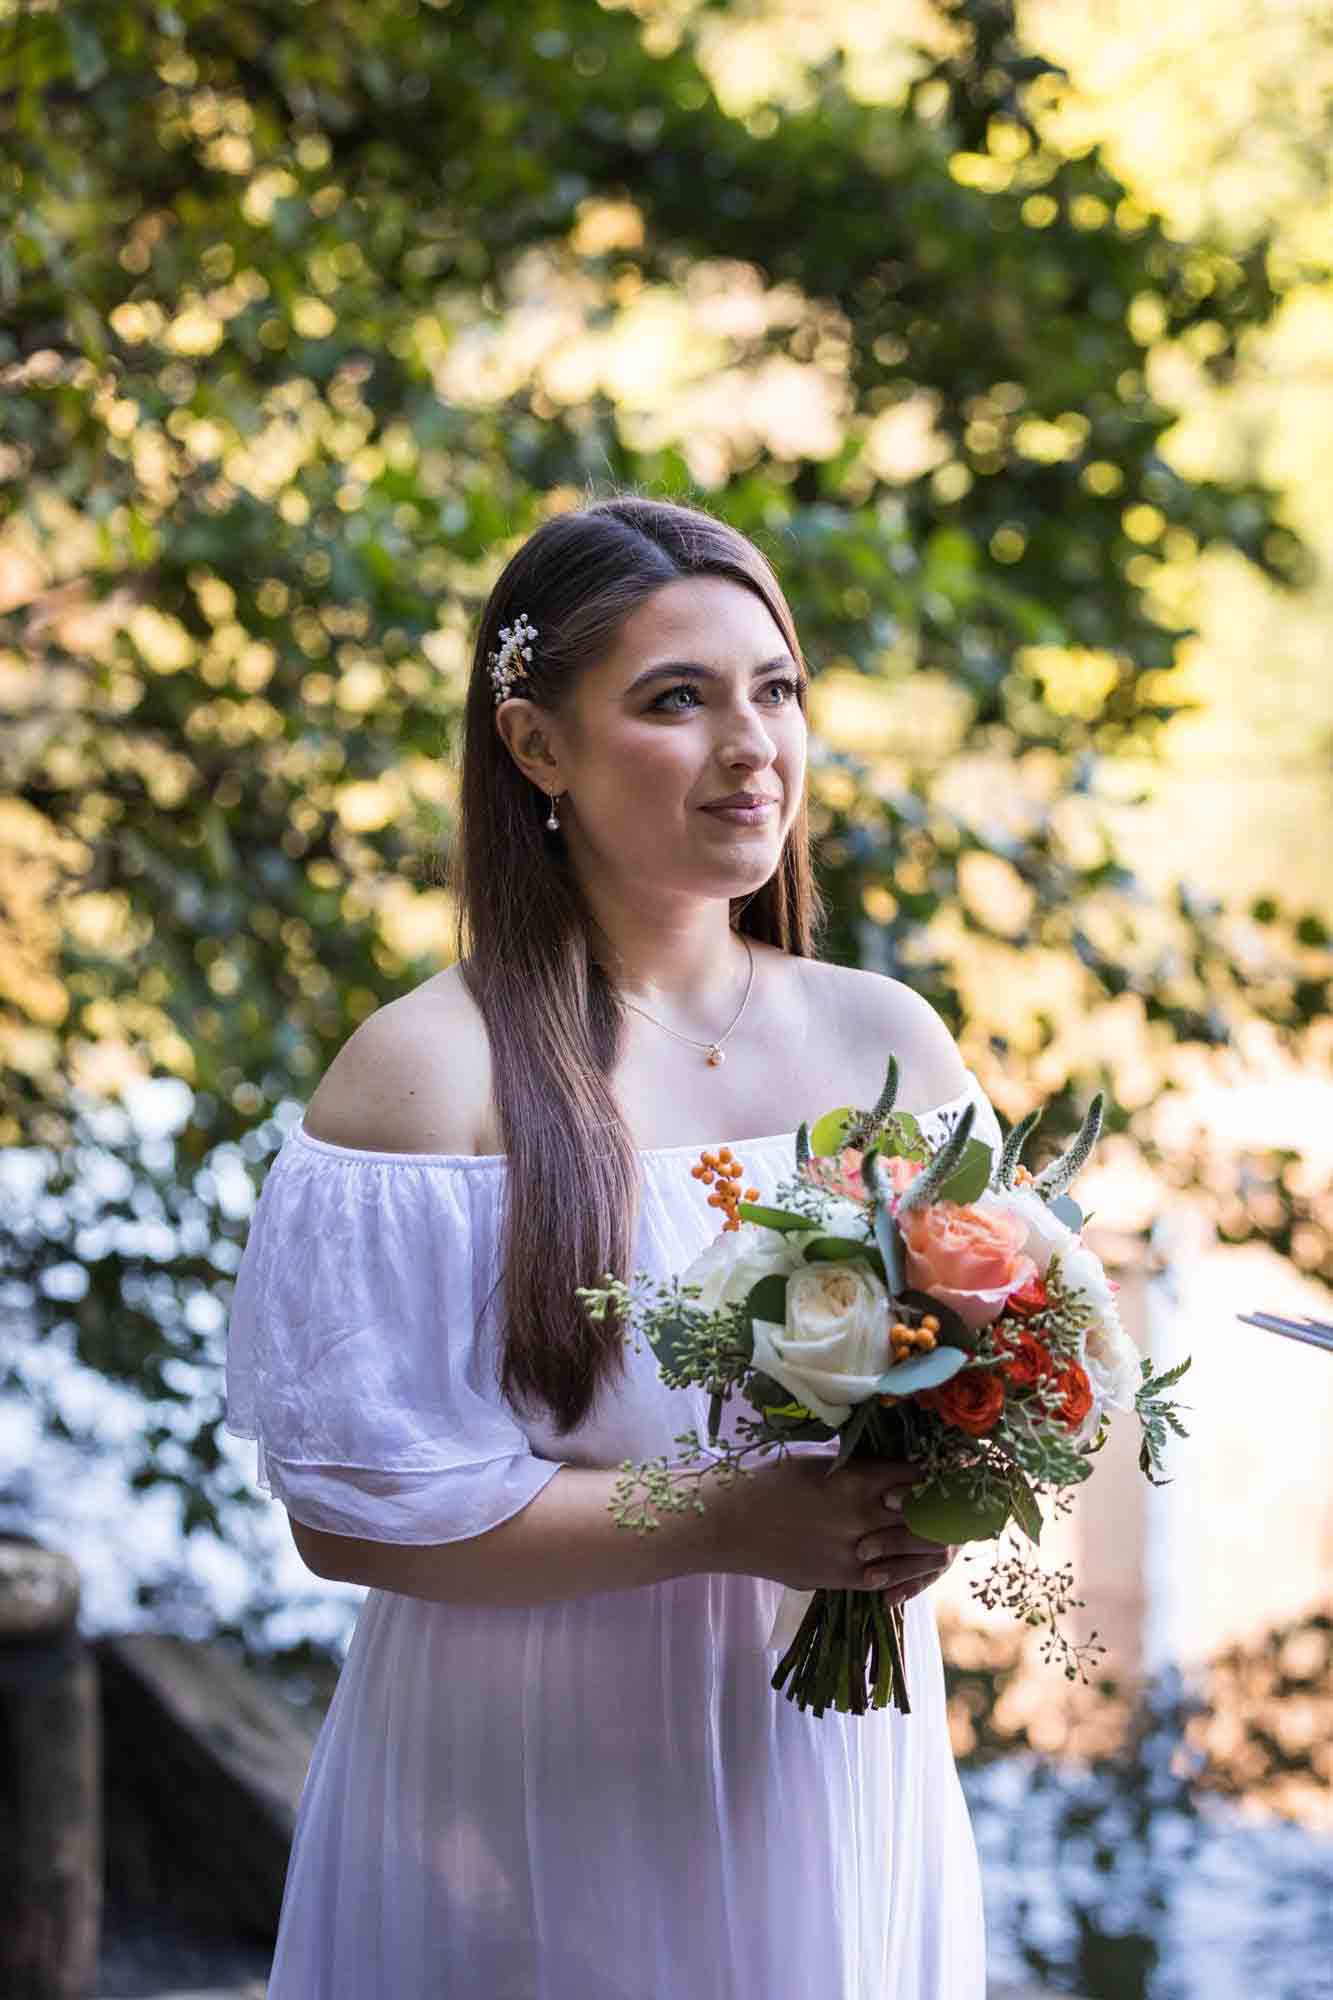 Bride wearing white and holding flower bouquet at Central park elopement